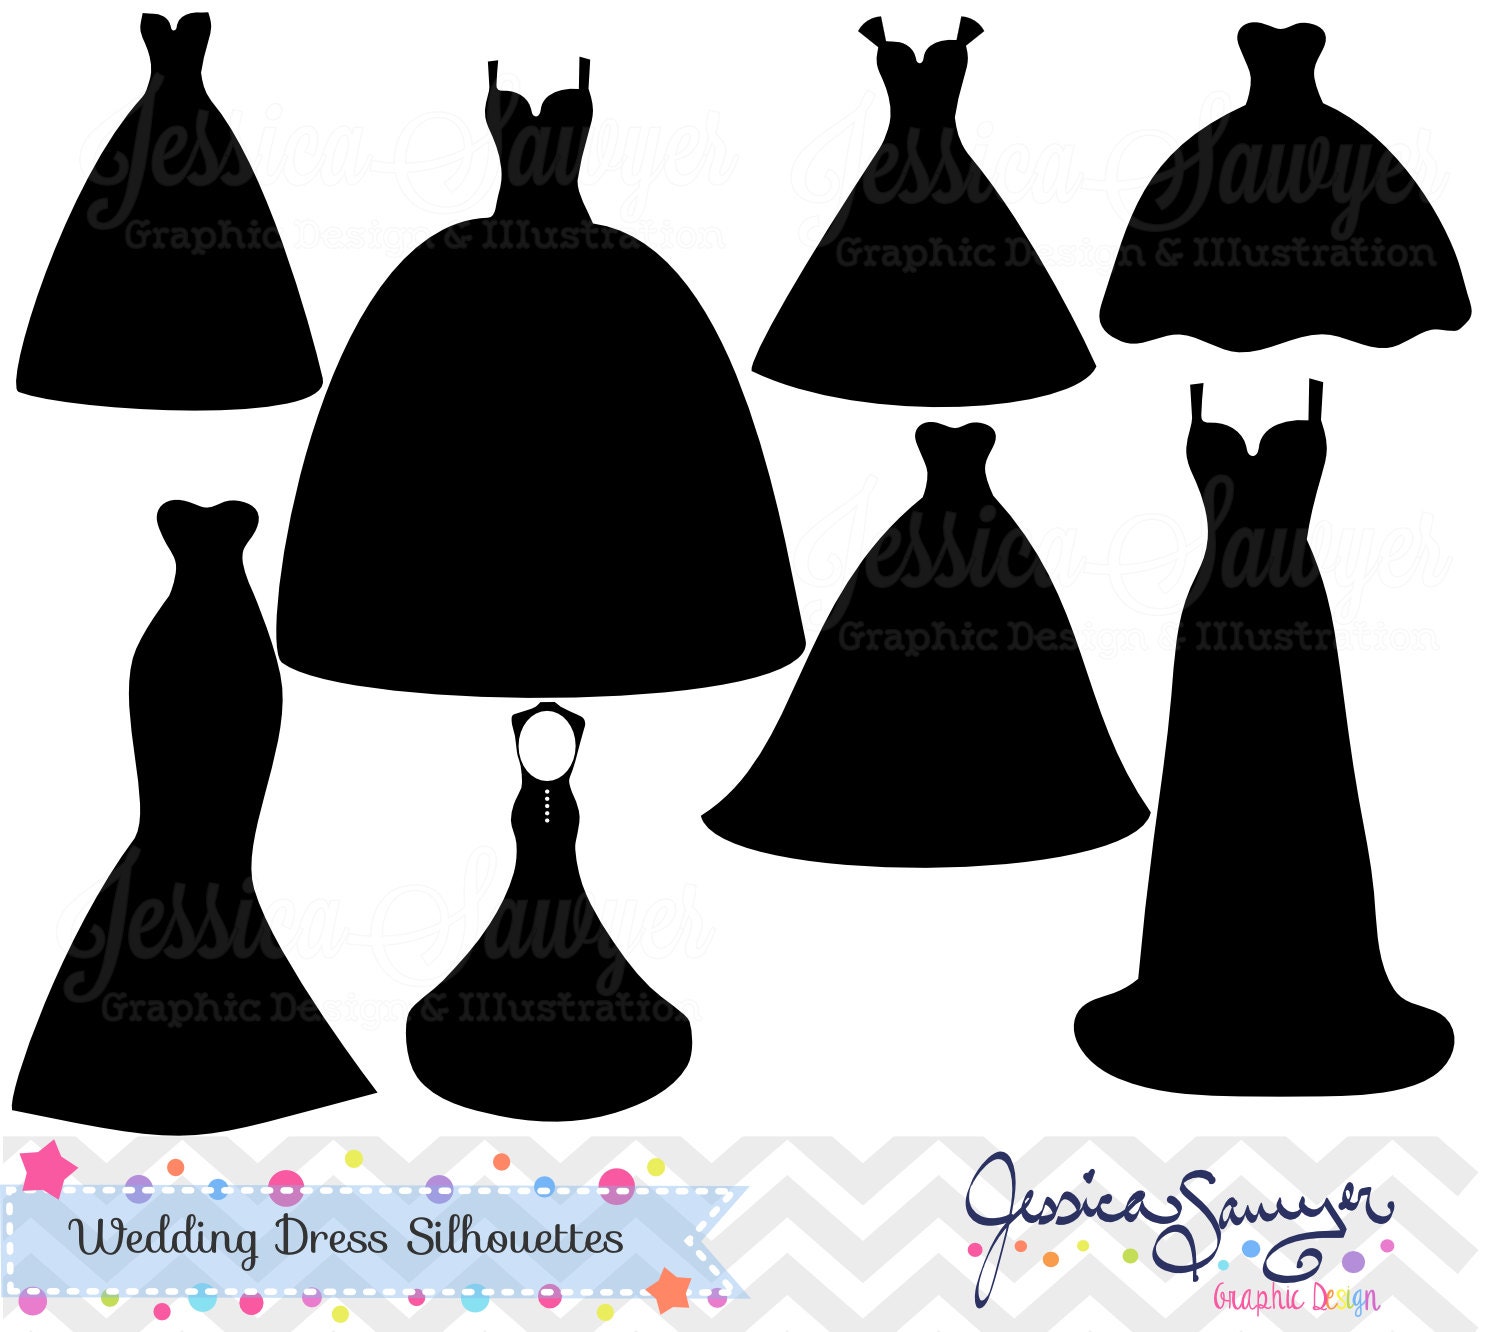 Download INSTANT DOWNLOAD wedding dress clipart silhouette clipart